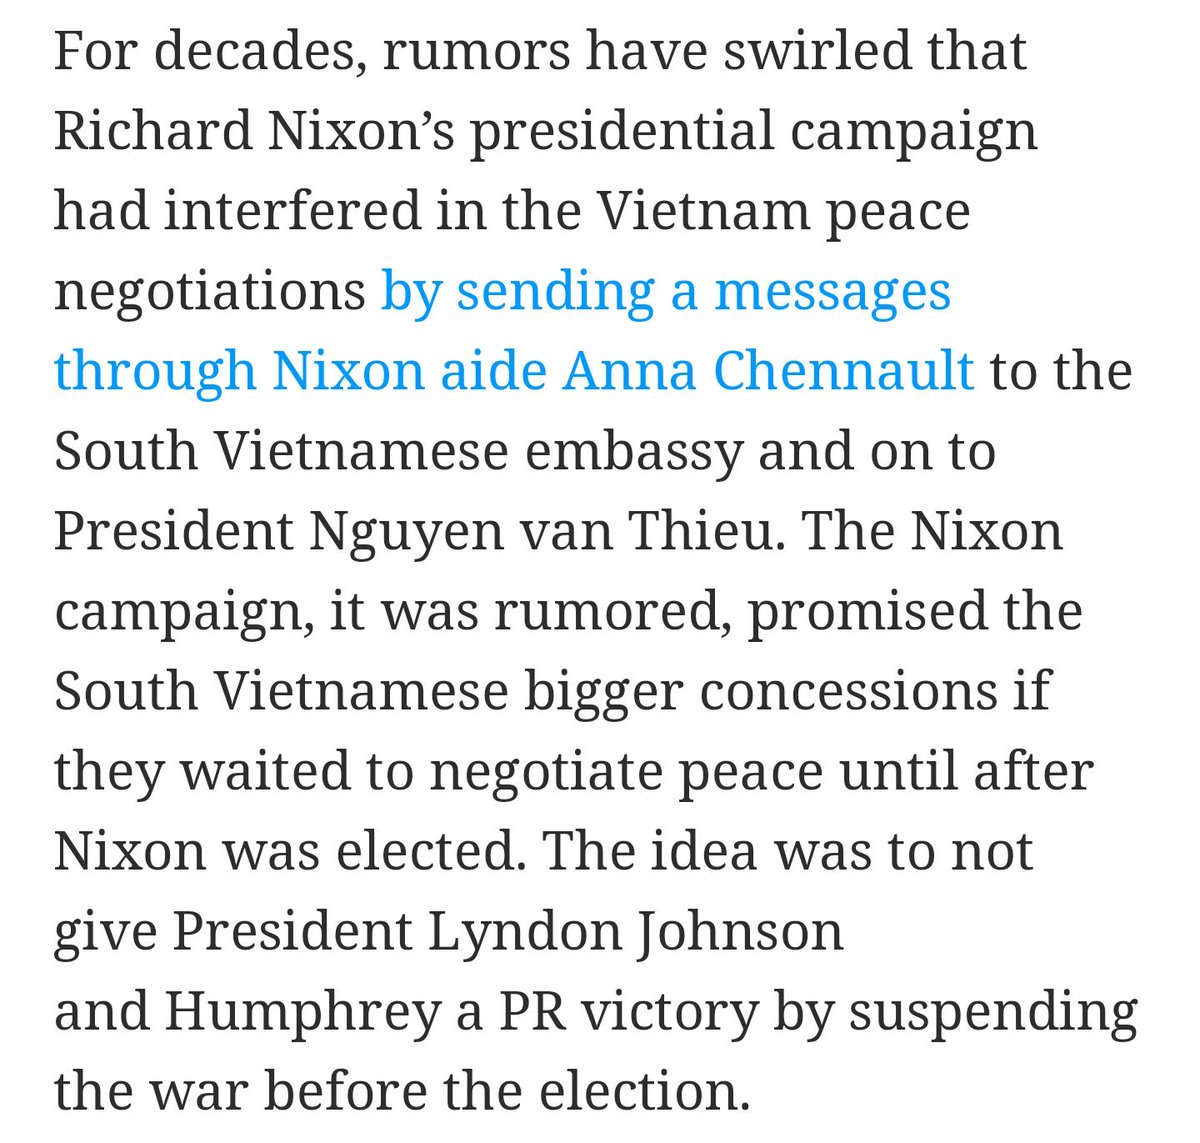 This "October Surprise" was done in secret & it took the last part of docs of the Nixon archives to be declassified for us to finally know. Nixon, of course, was not successful in negotiating a better deal & the Vietnam War didn't end for 7 more years. https://www.politico.com/magazine/story/2017/08/06/nixon-vietnam-candidate-conspired-with-foreign-power-win-election-215461